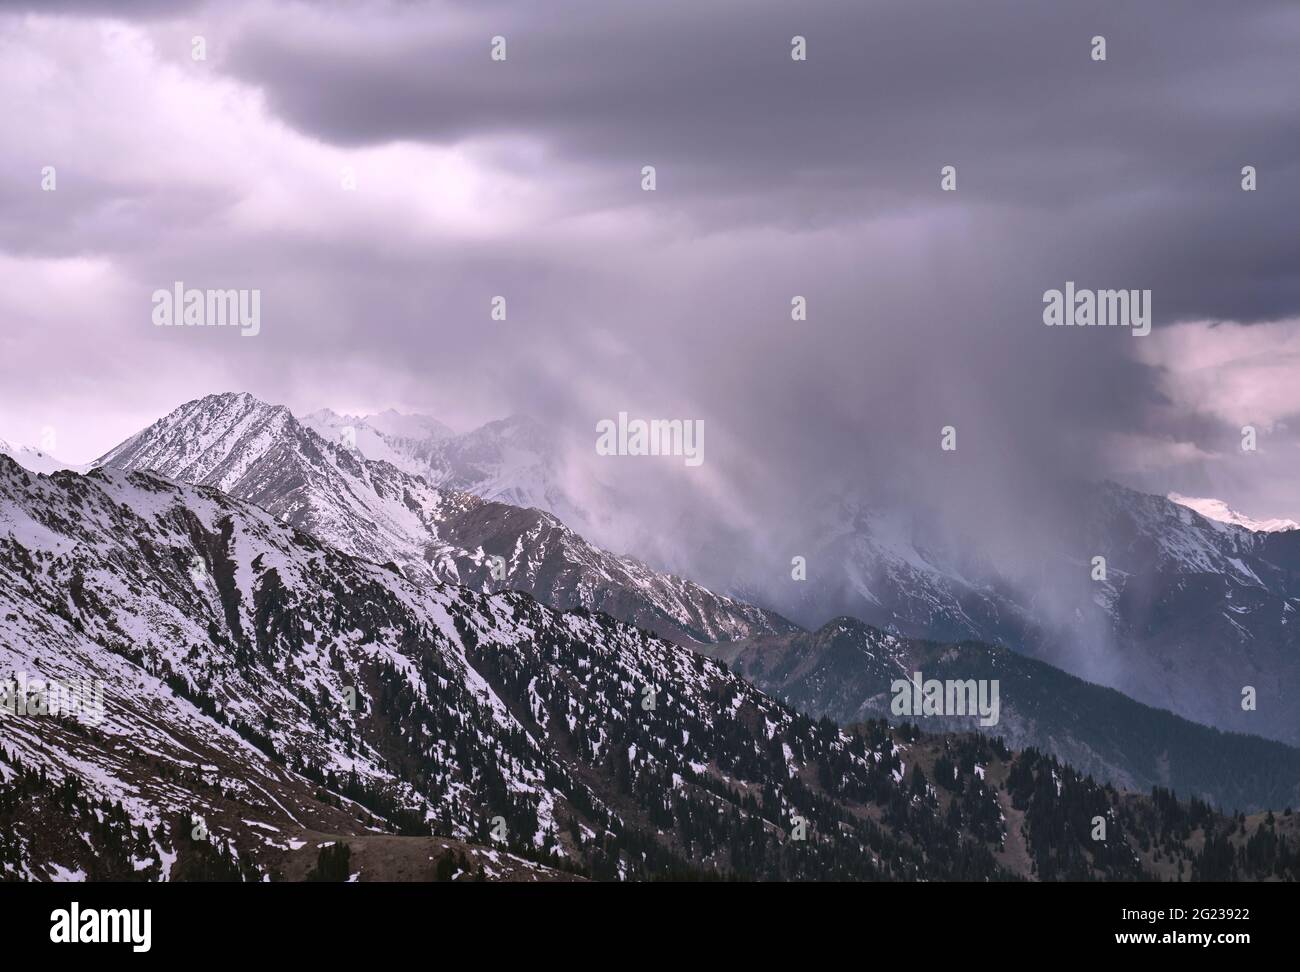 Spectacular snow clouds in a mountain gorge illuminated by the soft light of the morning sun; amazing natural phenomena, worsening weather, the approa Stock Photo